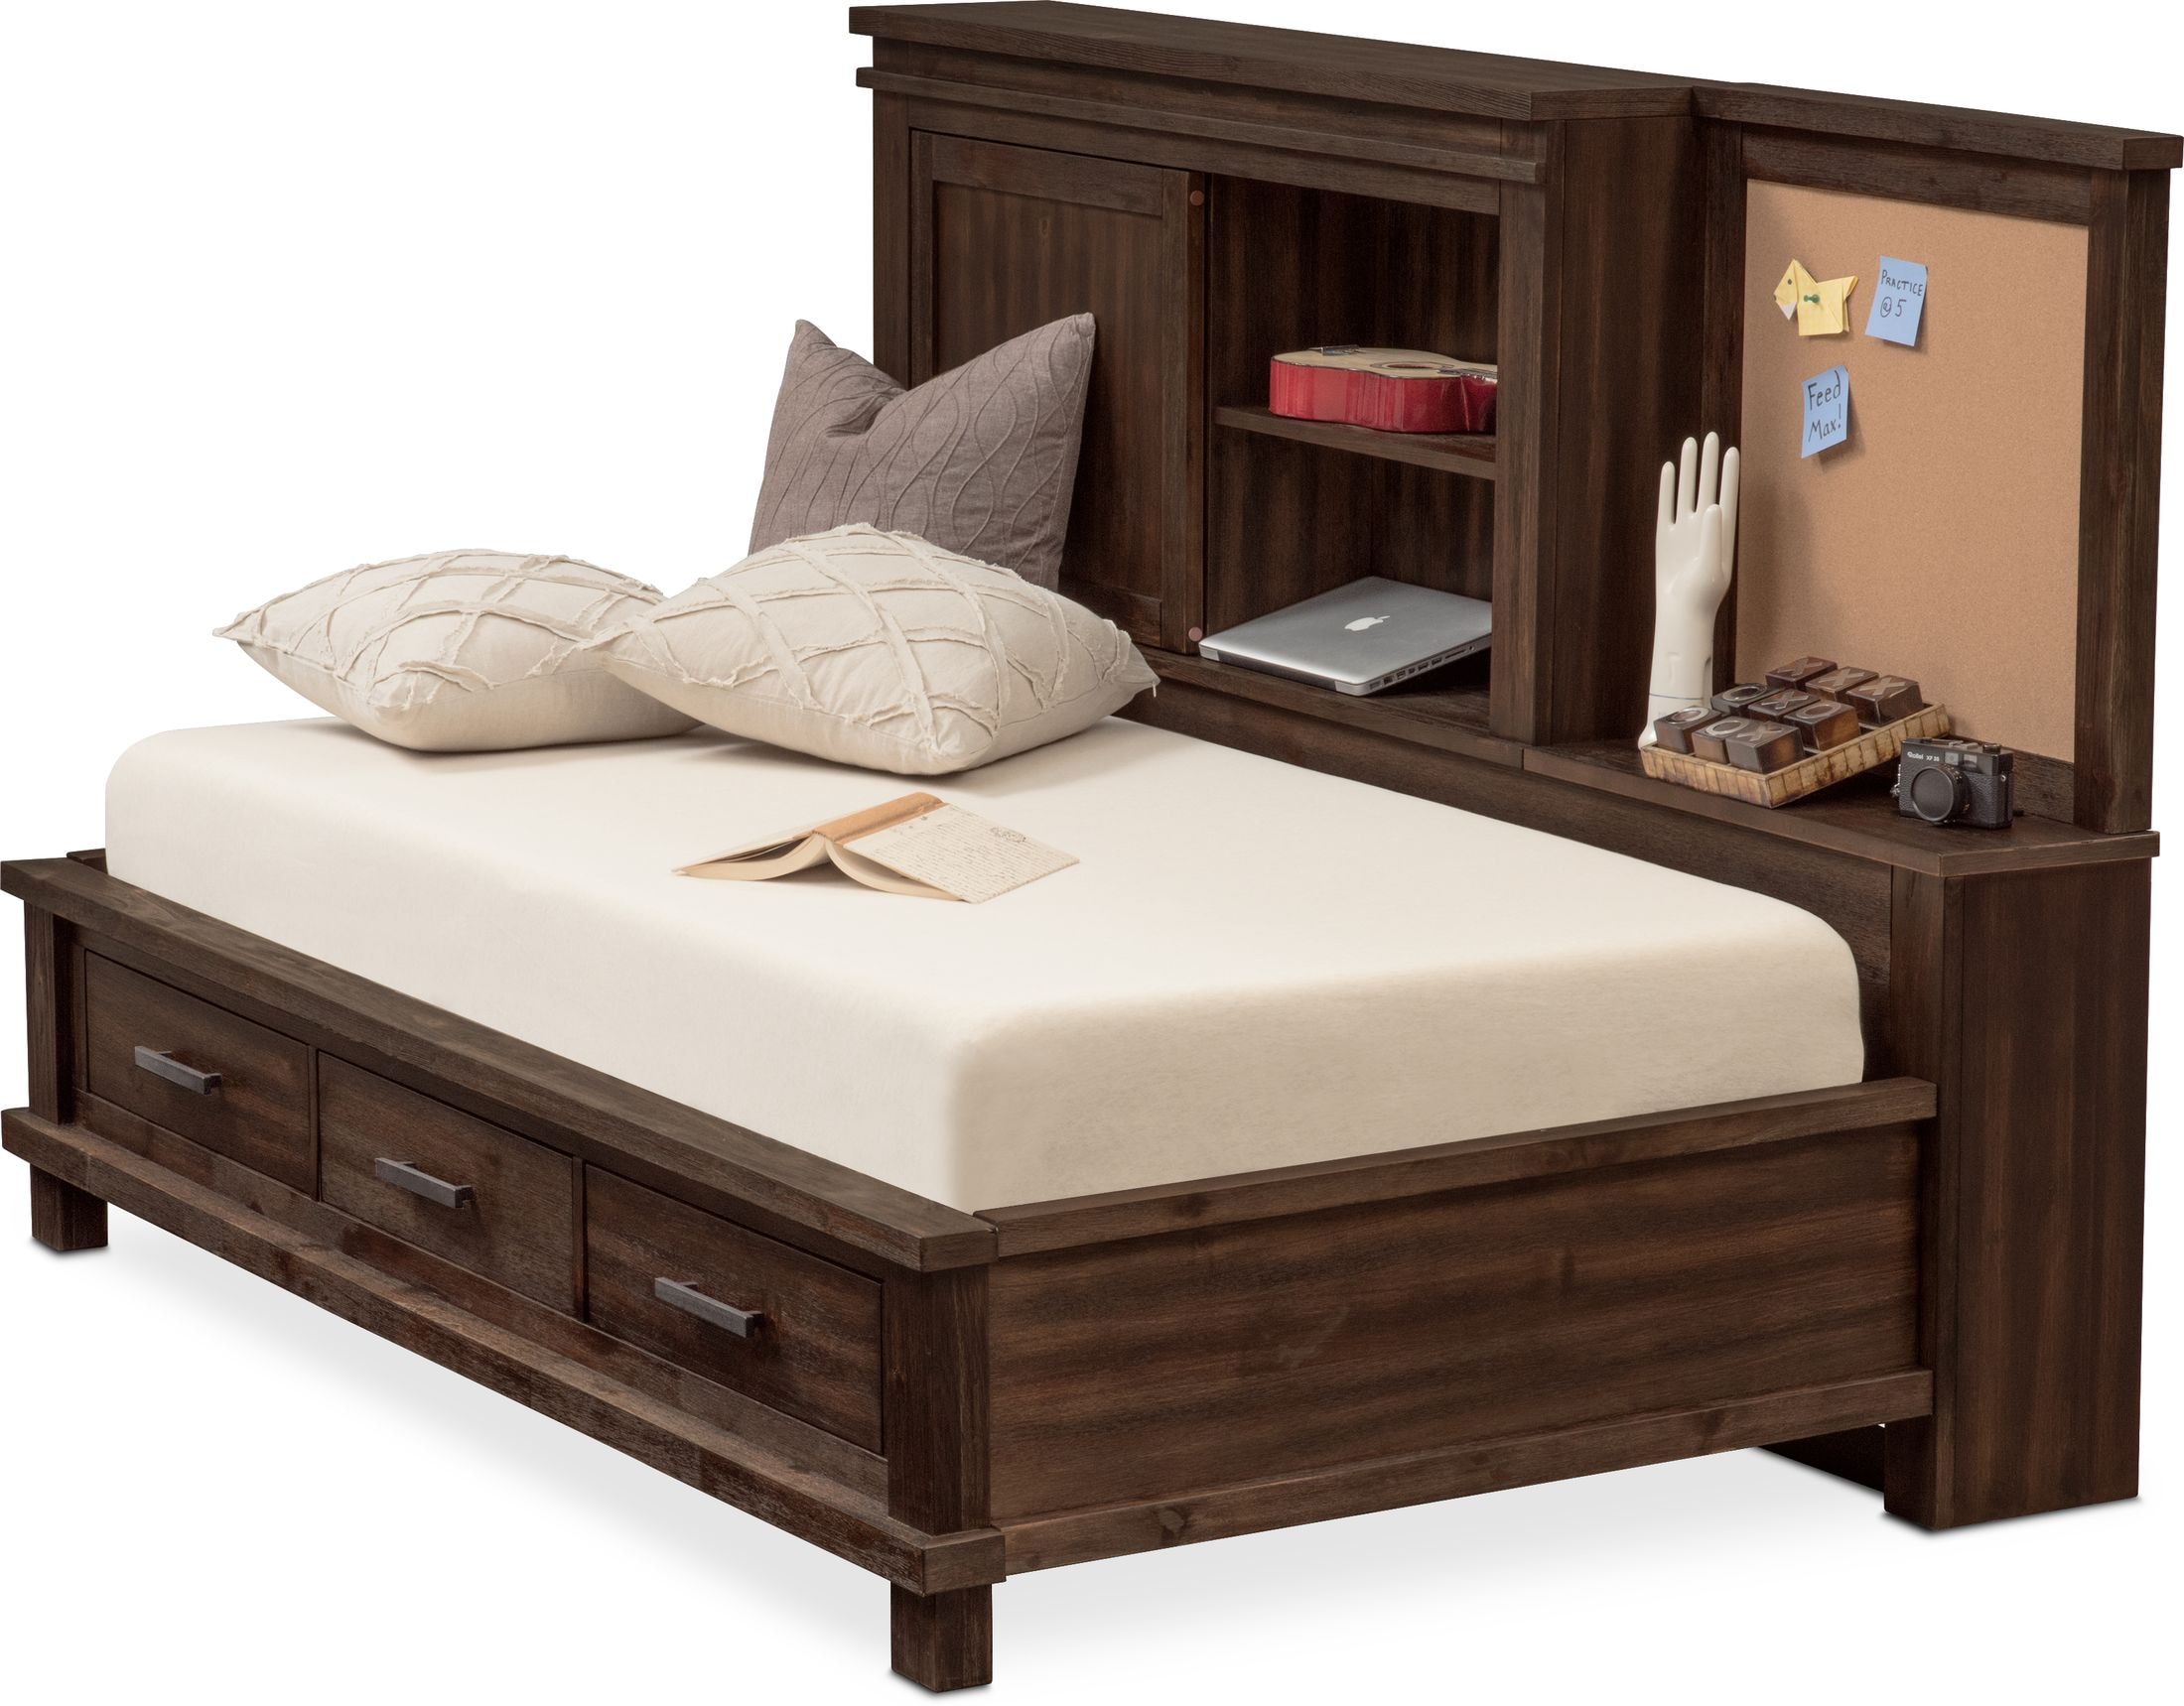 Undefined American Signature Furniture, Tribeca King Storage Bed